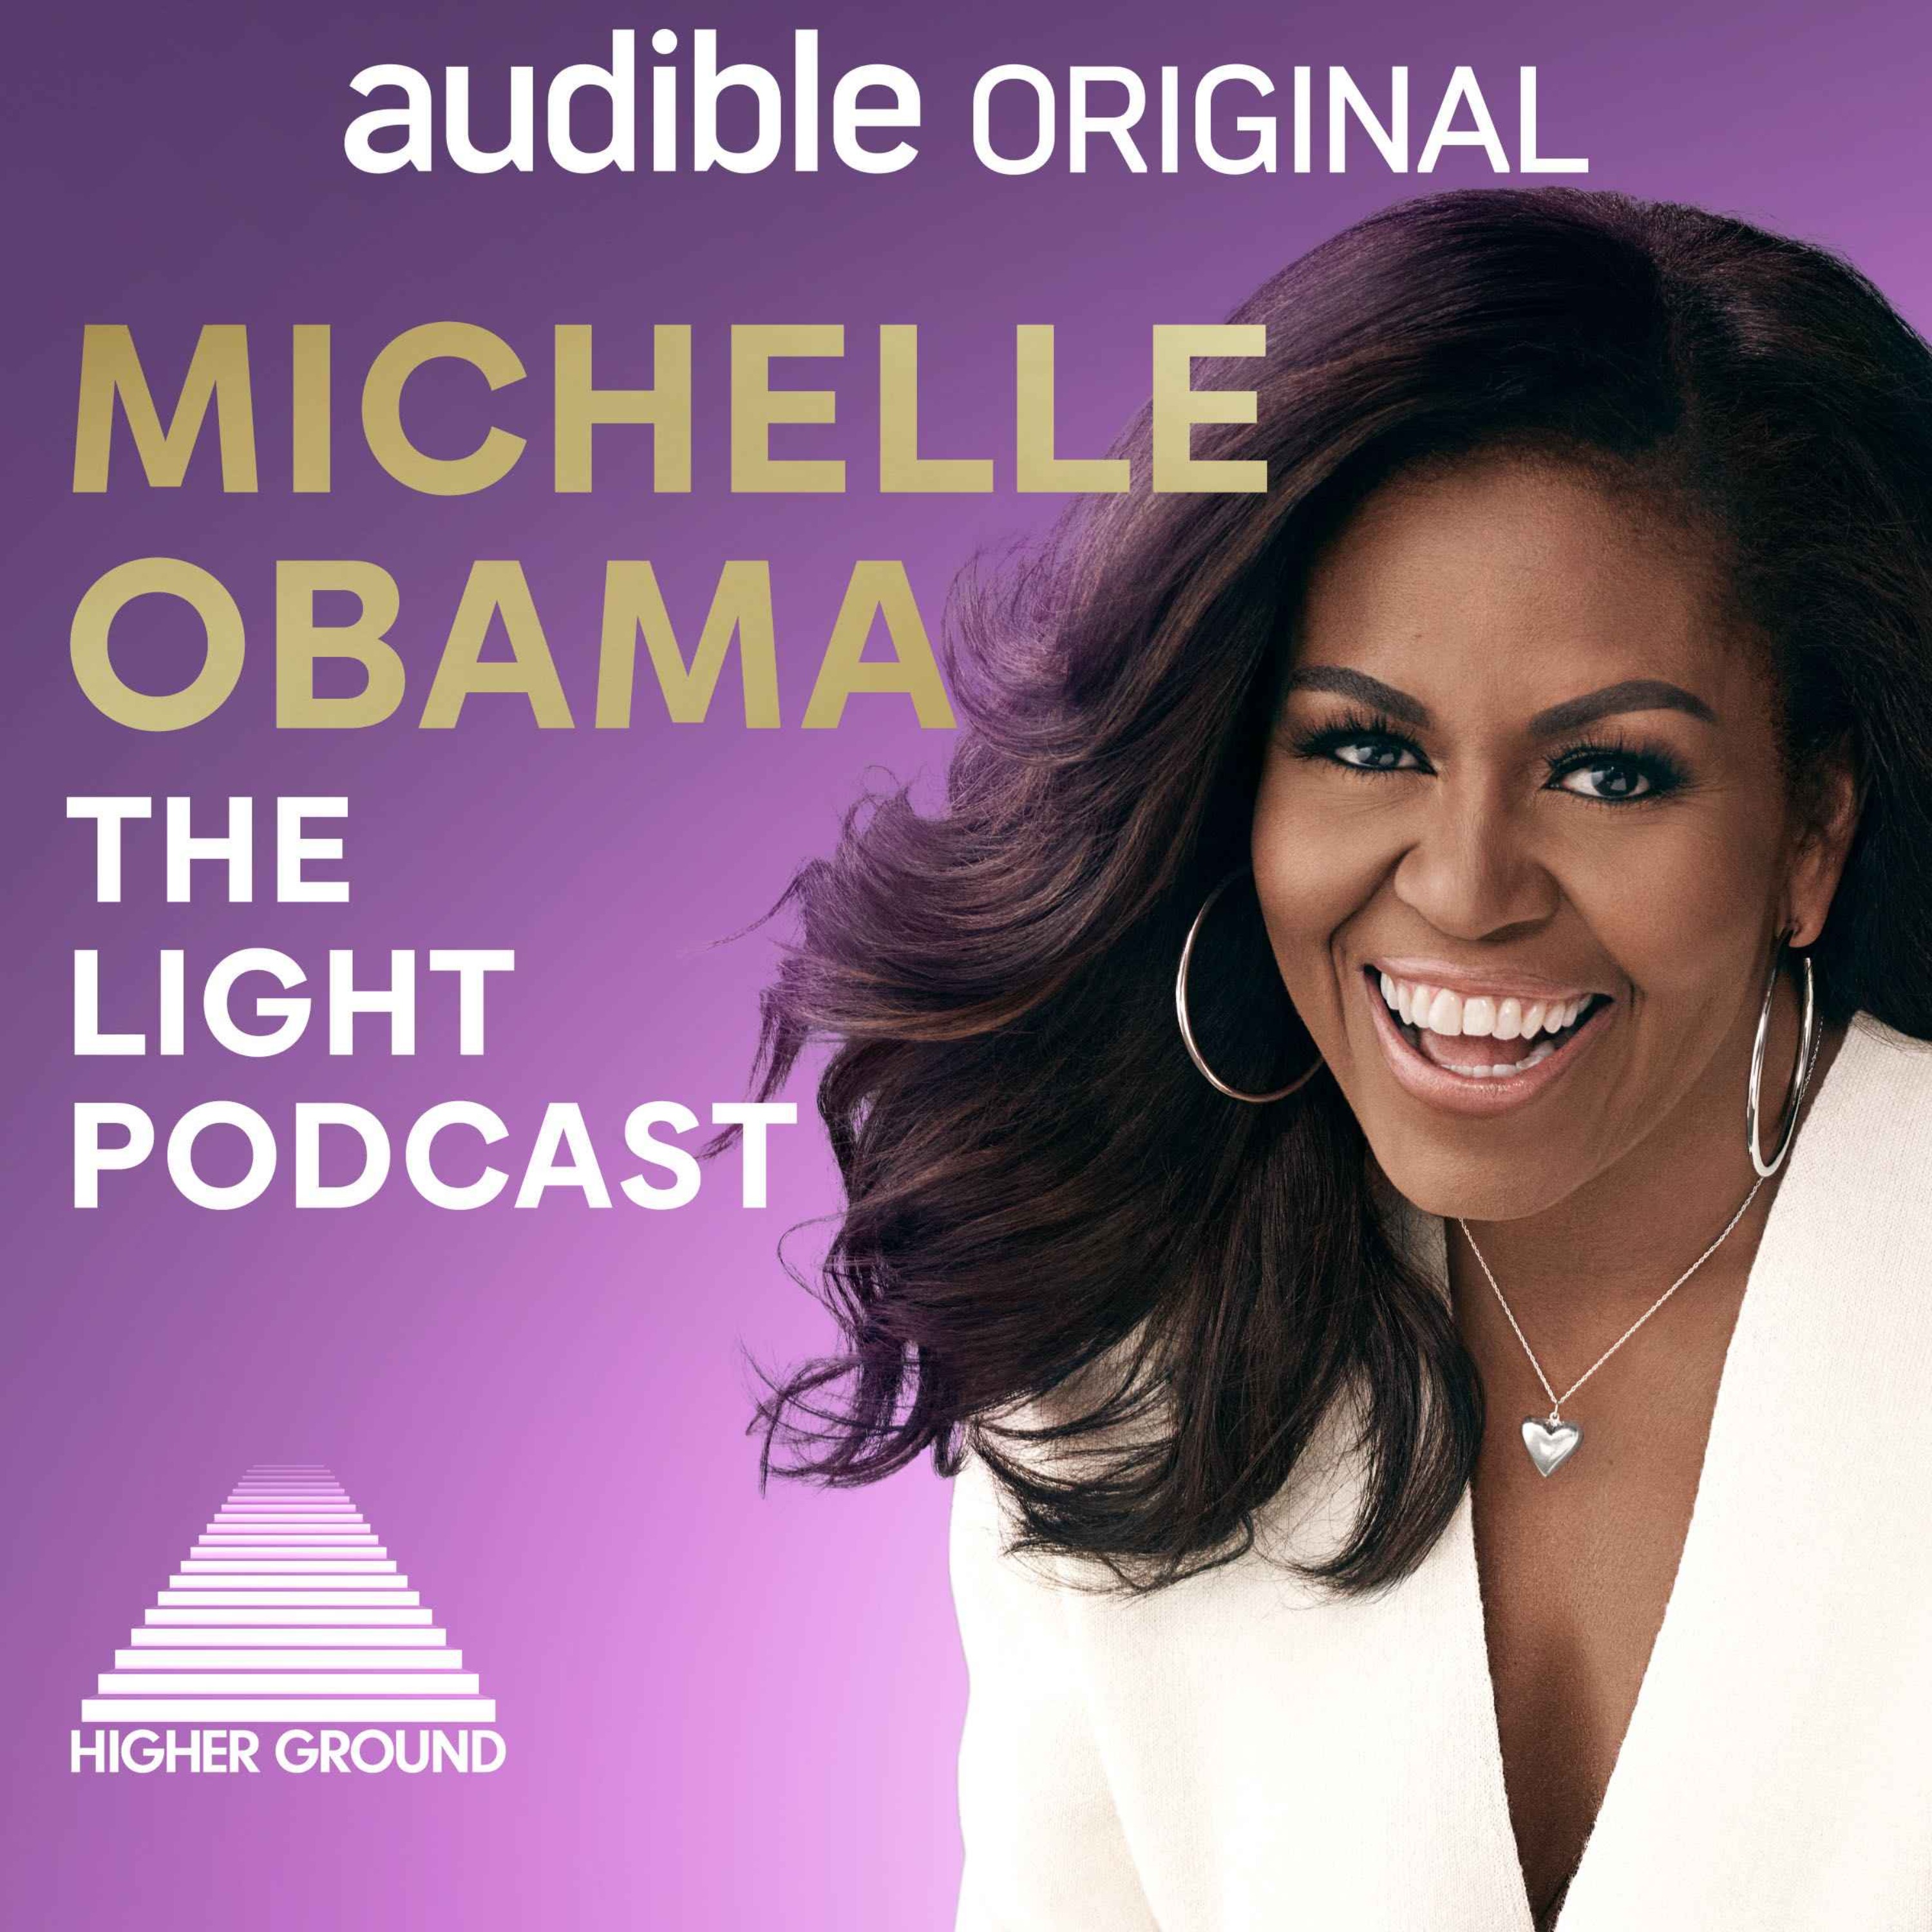 Michelle Obama: The Light Podcast by Michelle Obama